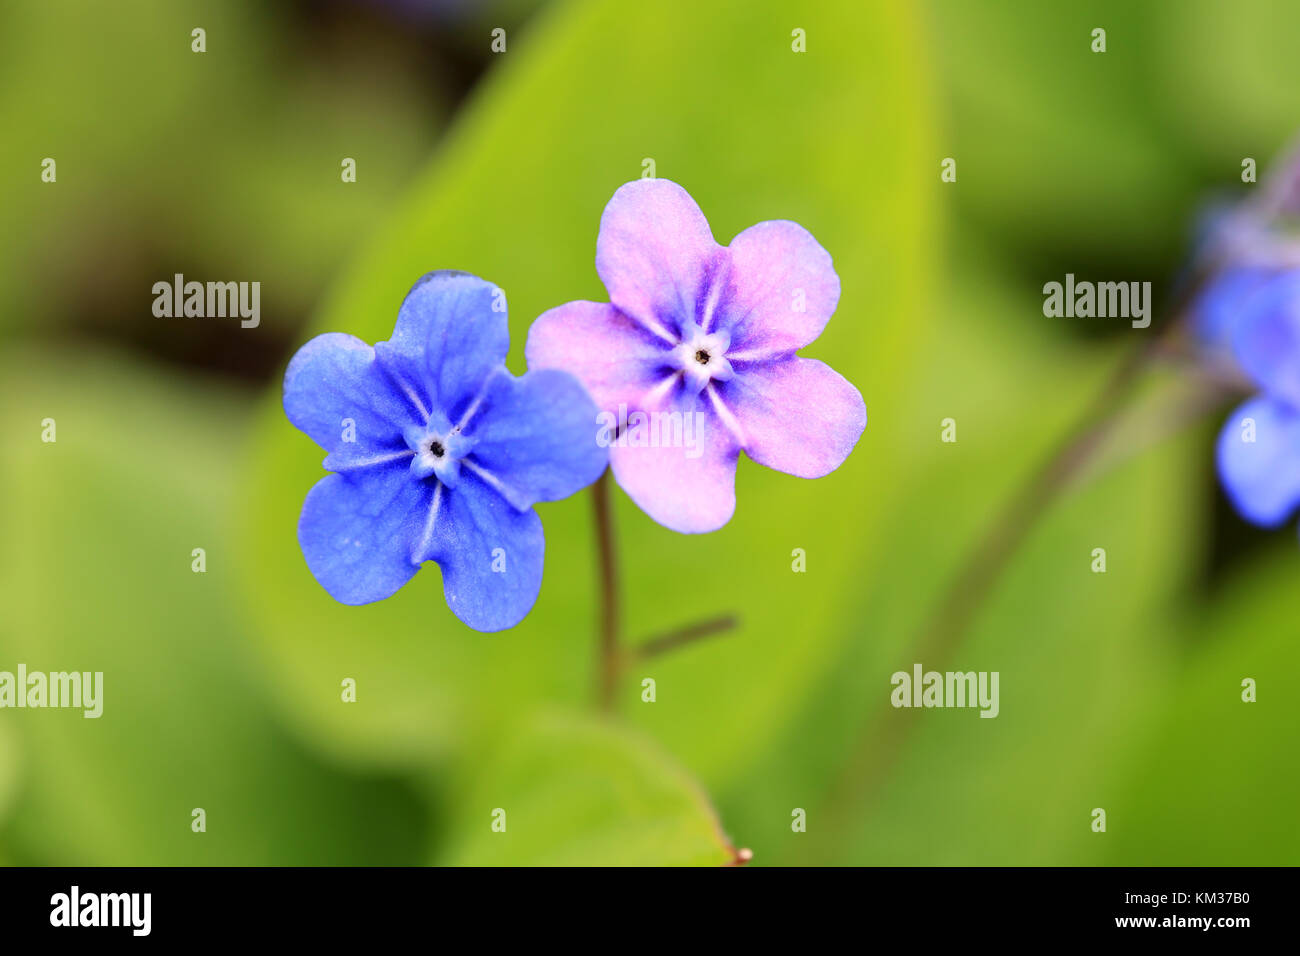 Two flowers of Omphalodes verna, also known as Blue-eyed Mary and Creeping Navelwort. The blossoms are first blue, then may turn pink. Shallow depth o Stock Photo